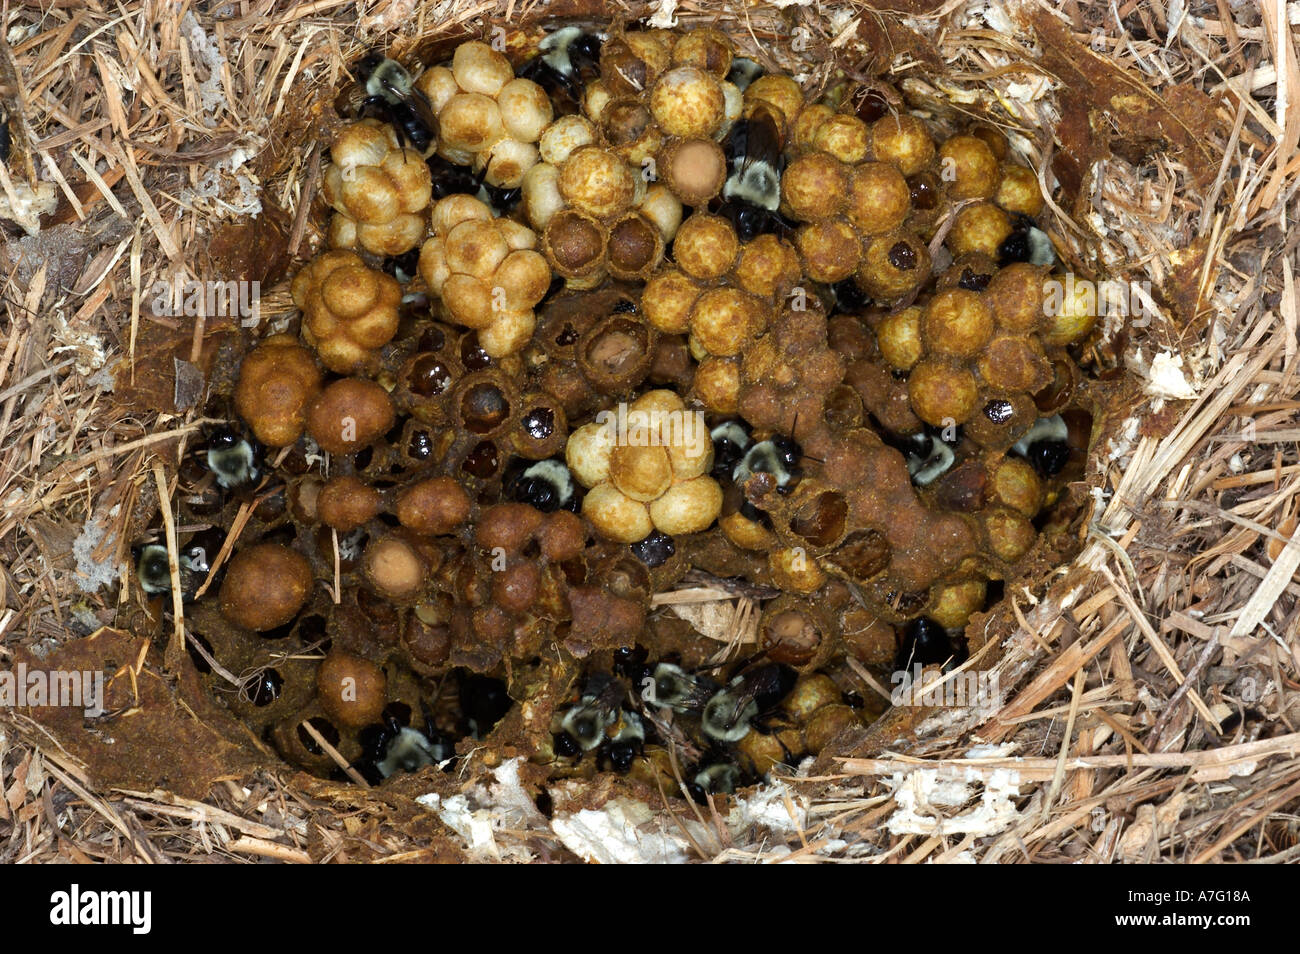 Bumblebee workers in nest showing wax cells with honey pollen and developing bees pupating into adults  Stock Photo